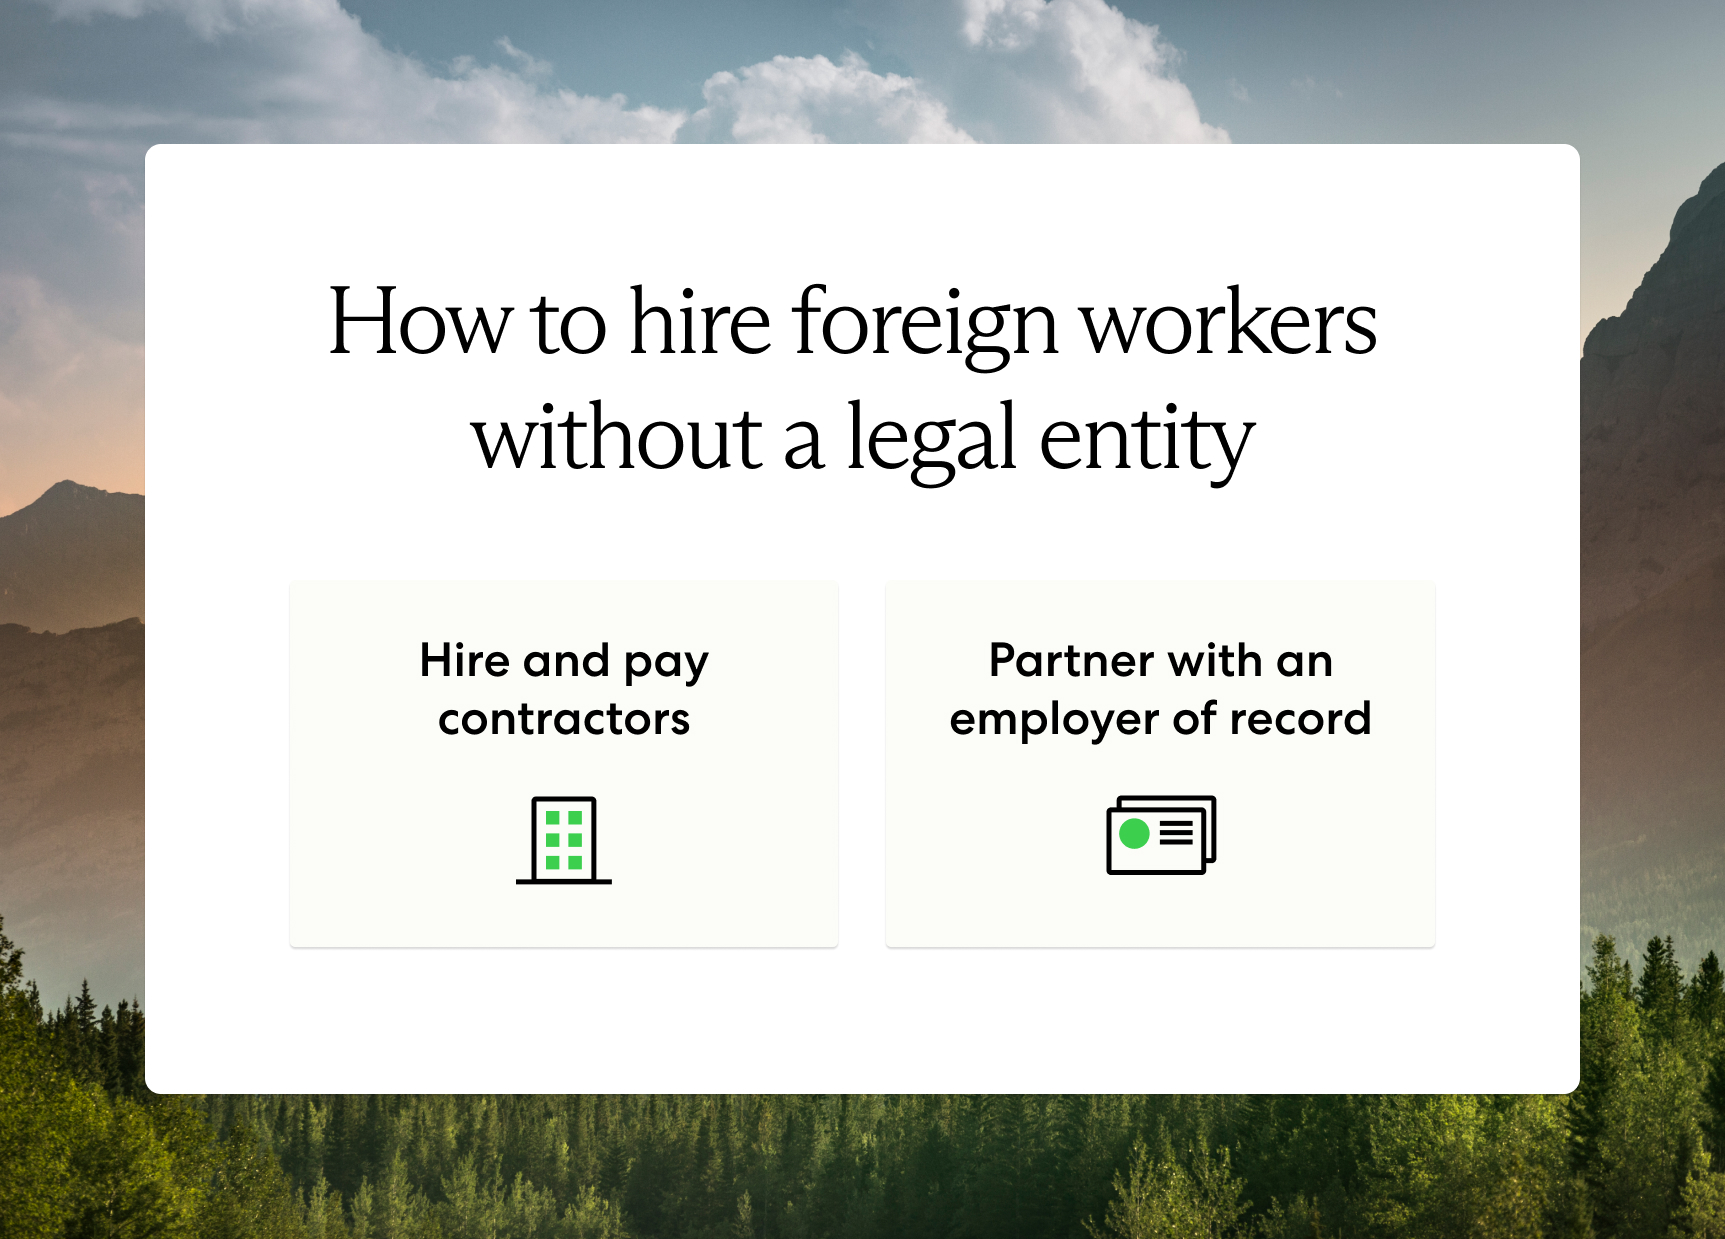 The two ways to hire foreign workers without an entity are engaging contractors or partnering with an employer of record.